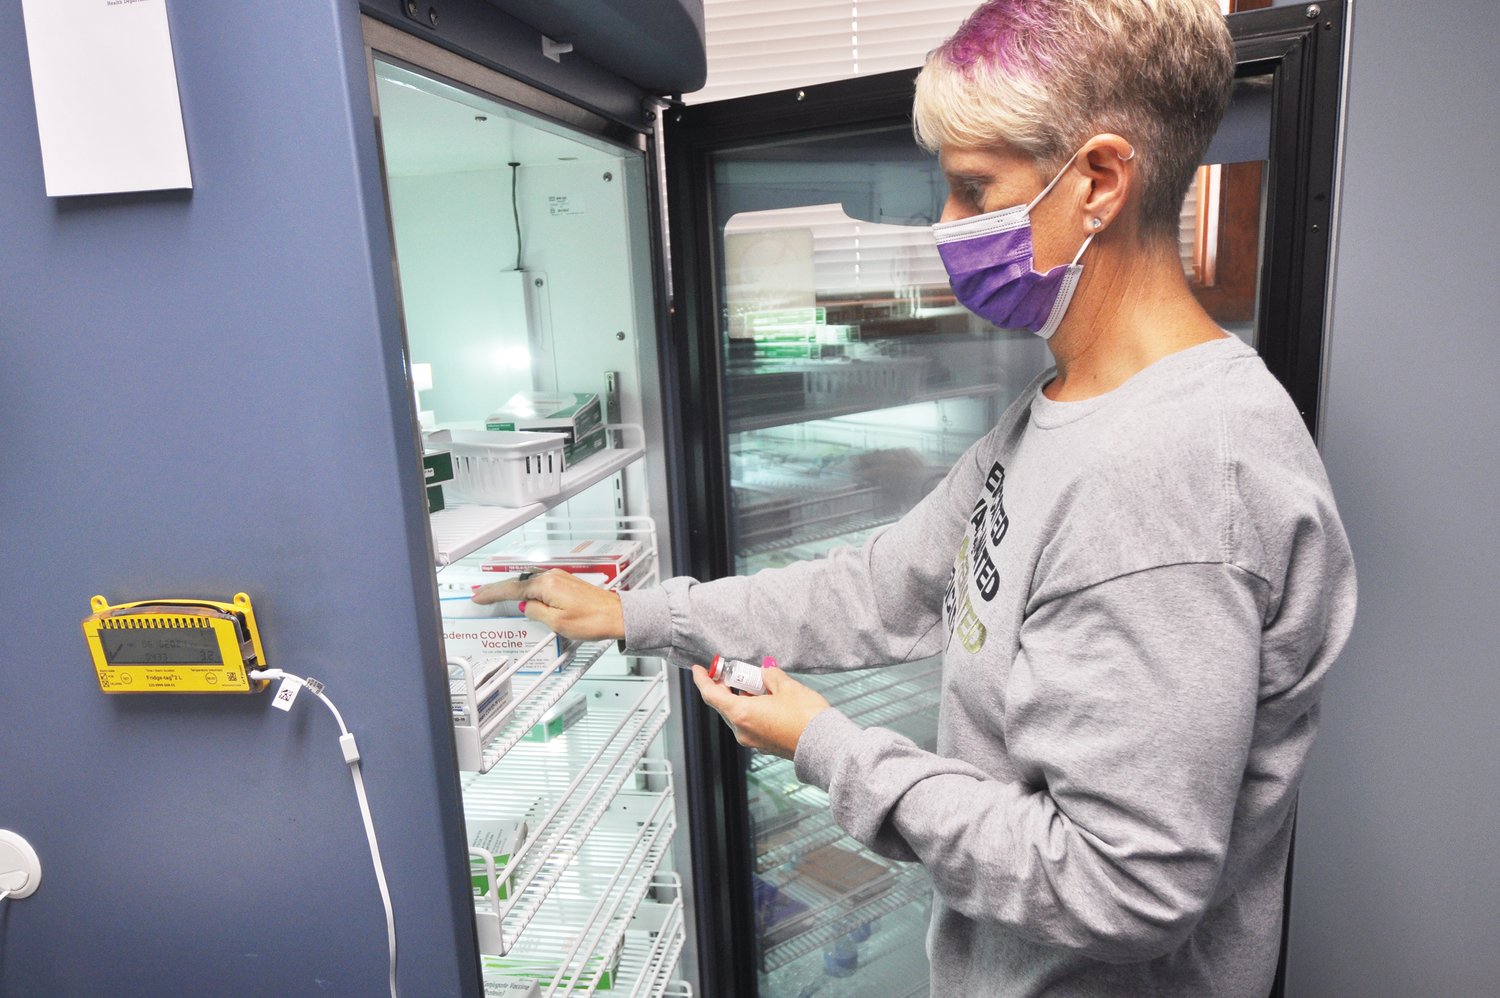 Montgomery County Health Department Preparedness Coordinator Cindy Bushong removes Moderna vaccine from a refrigerator at the health department.